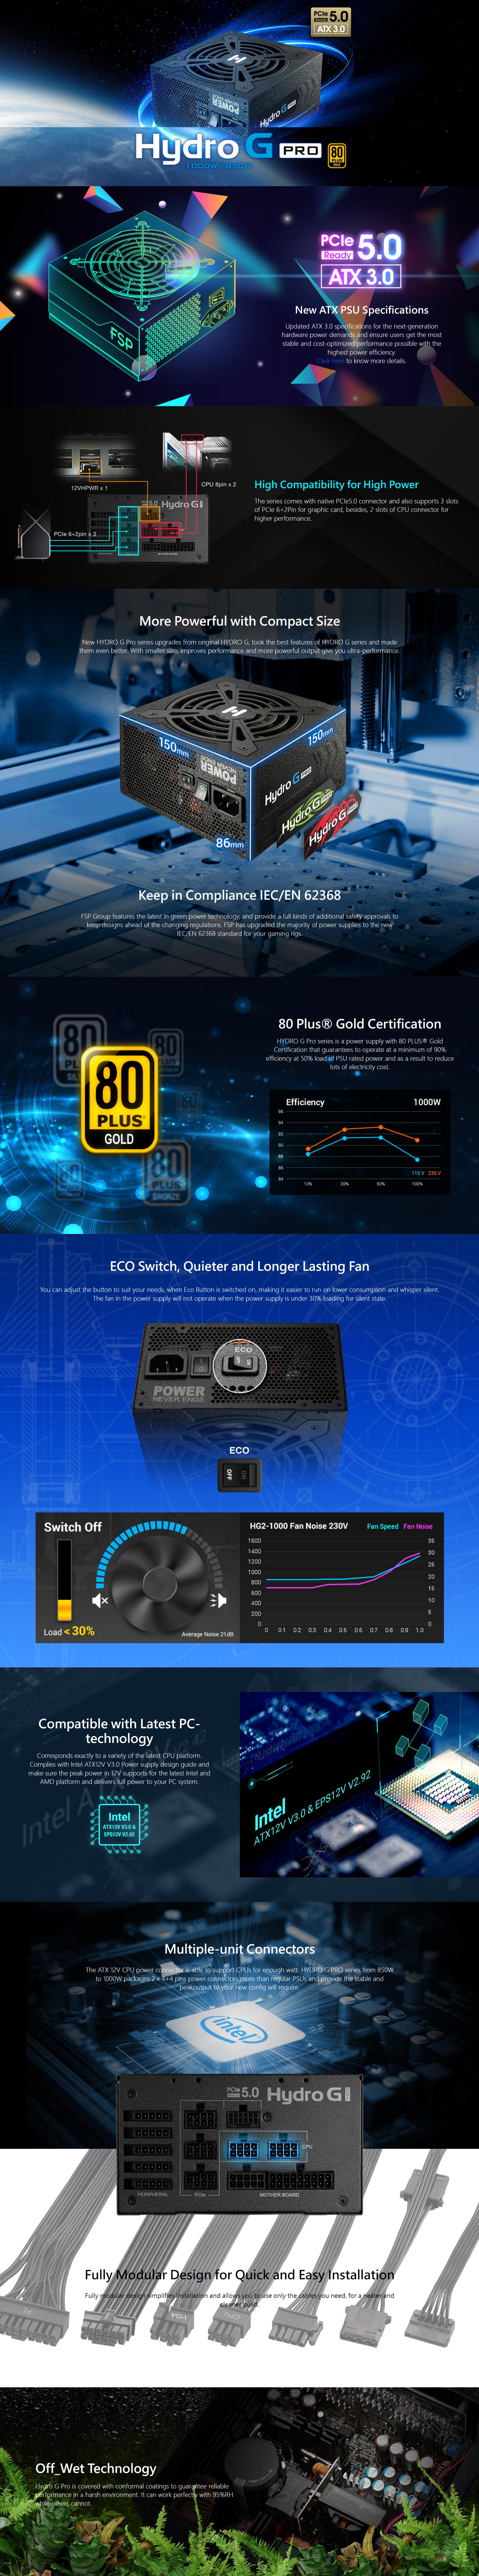 A large marketing image providing additional information about the product FSP Hydro G PRO 1000W Gold PCIe 5.0 ATX Modular PSU - Additional alt info not provided